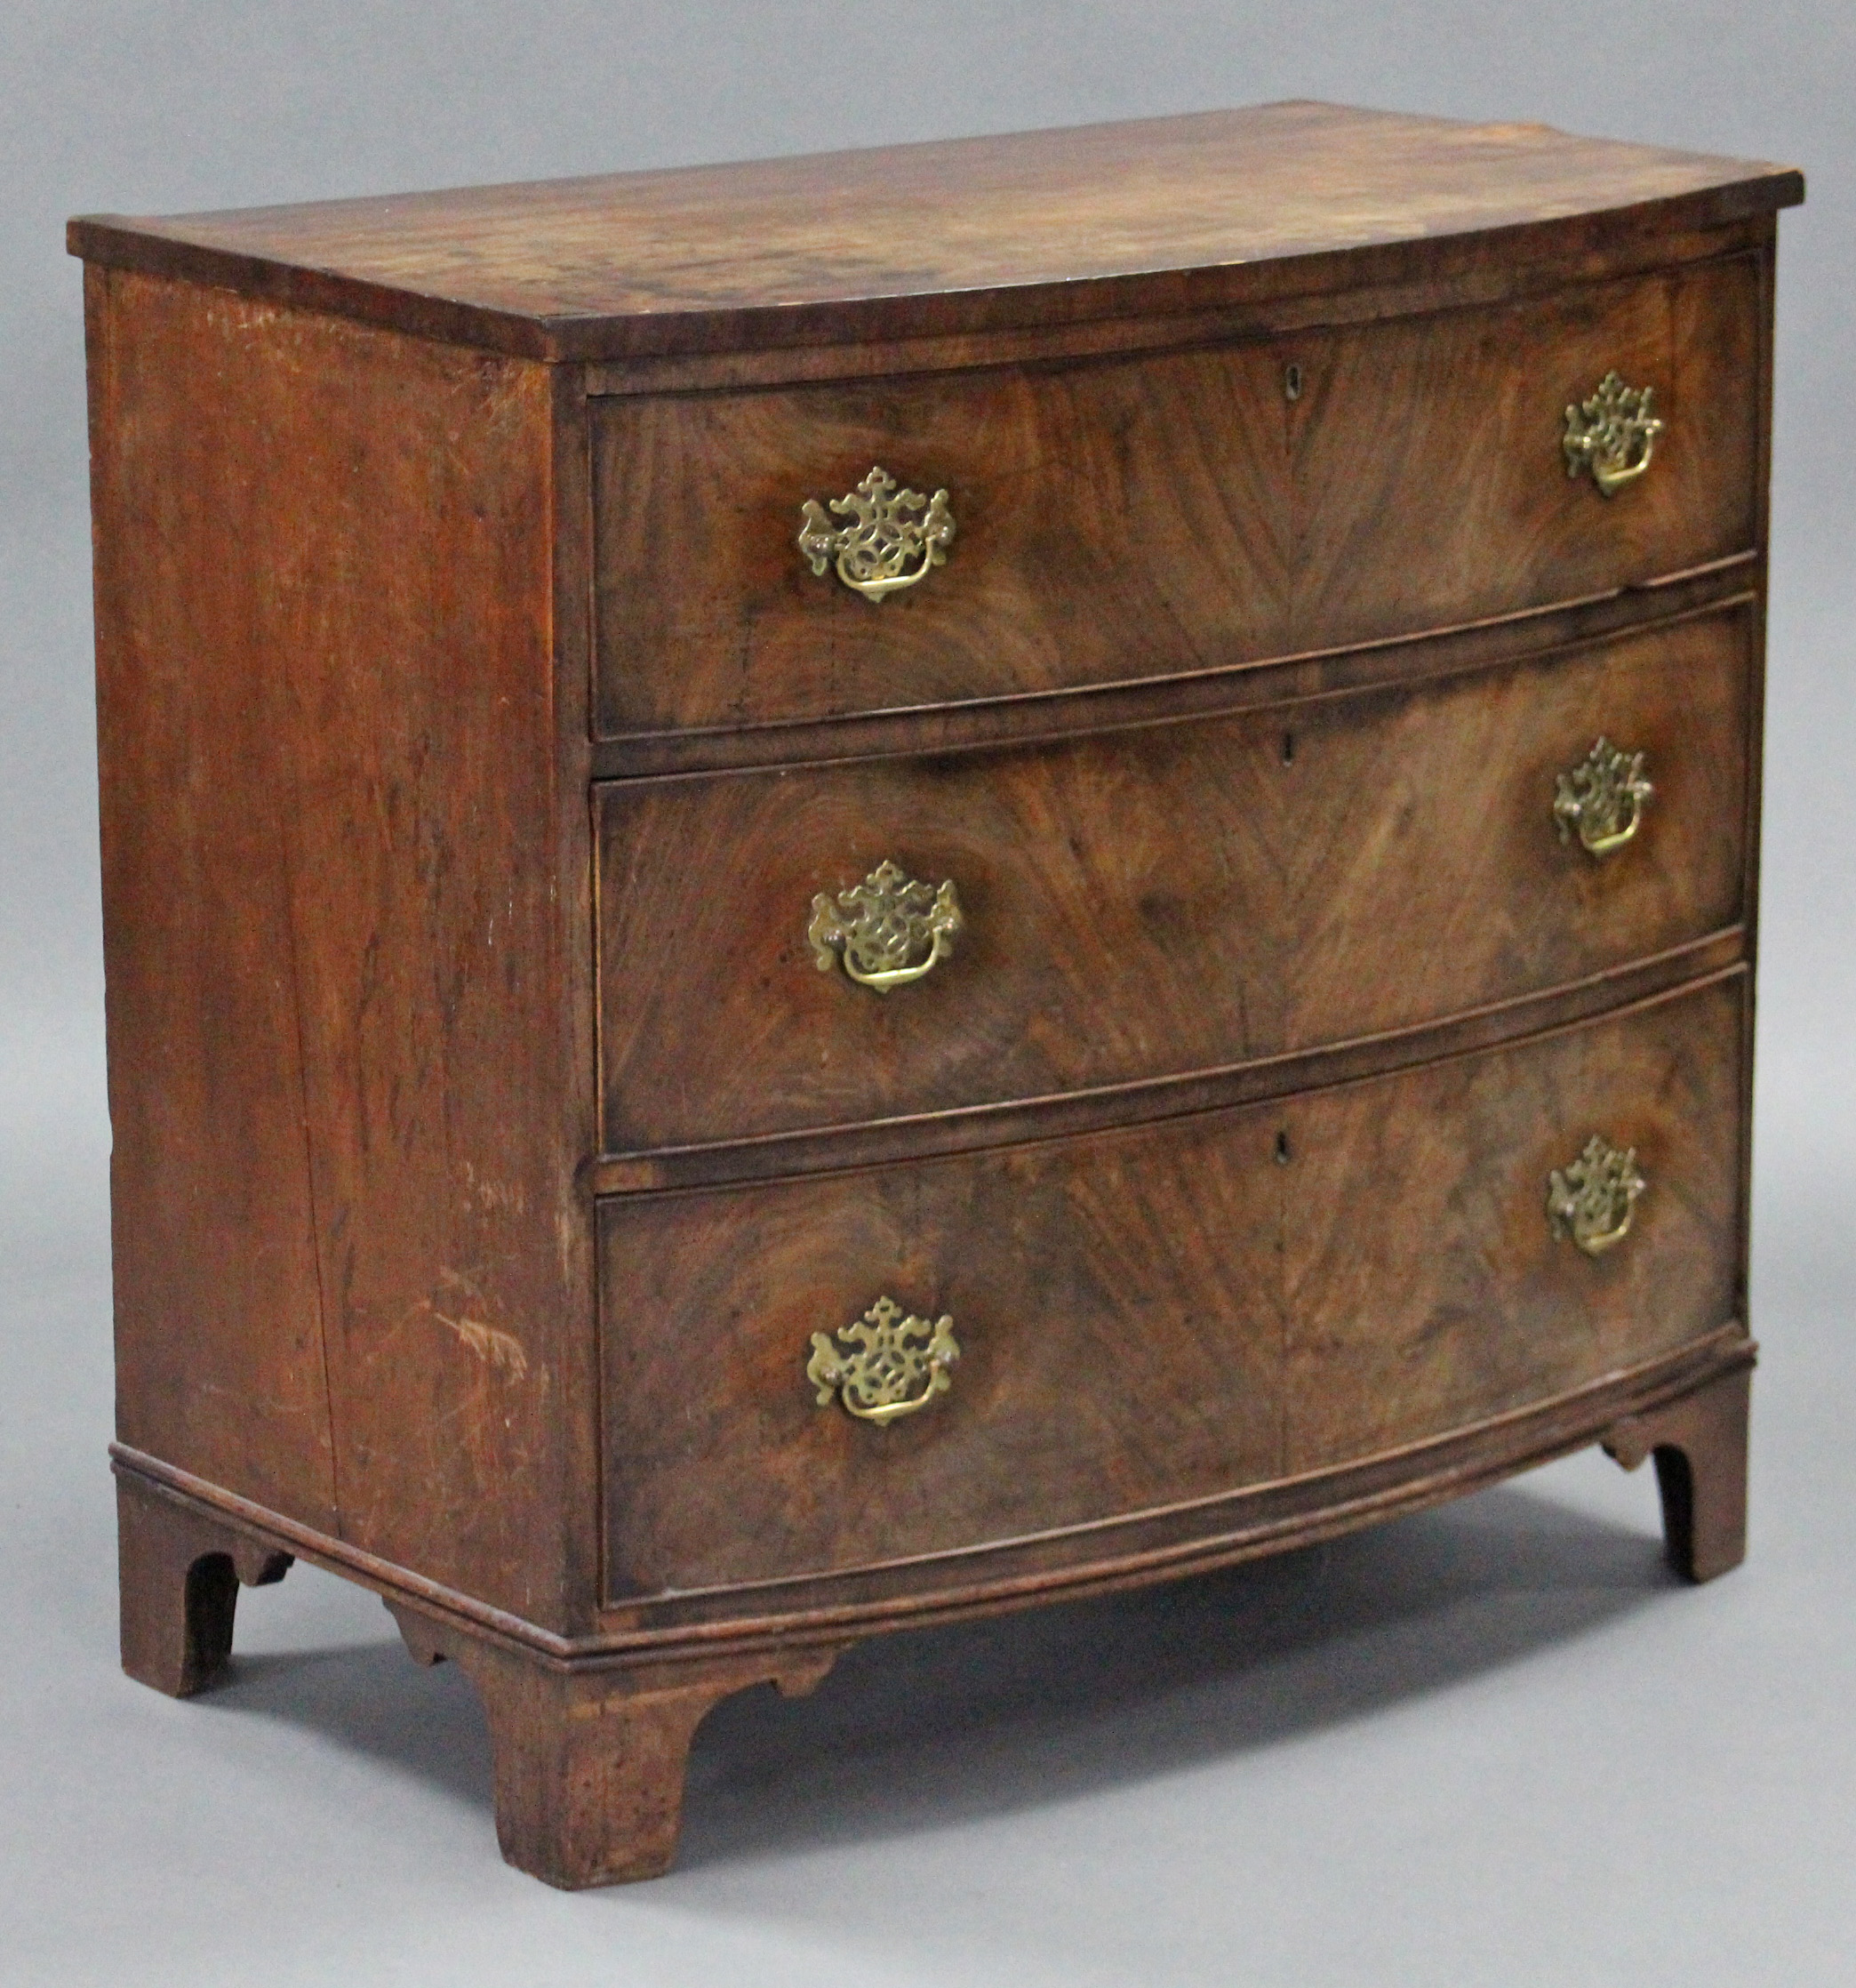 An early 19th century figured mahogany bow-front chest fitted three long graduated drawers with